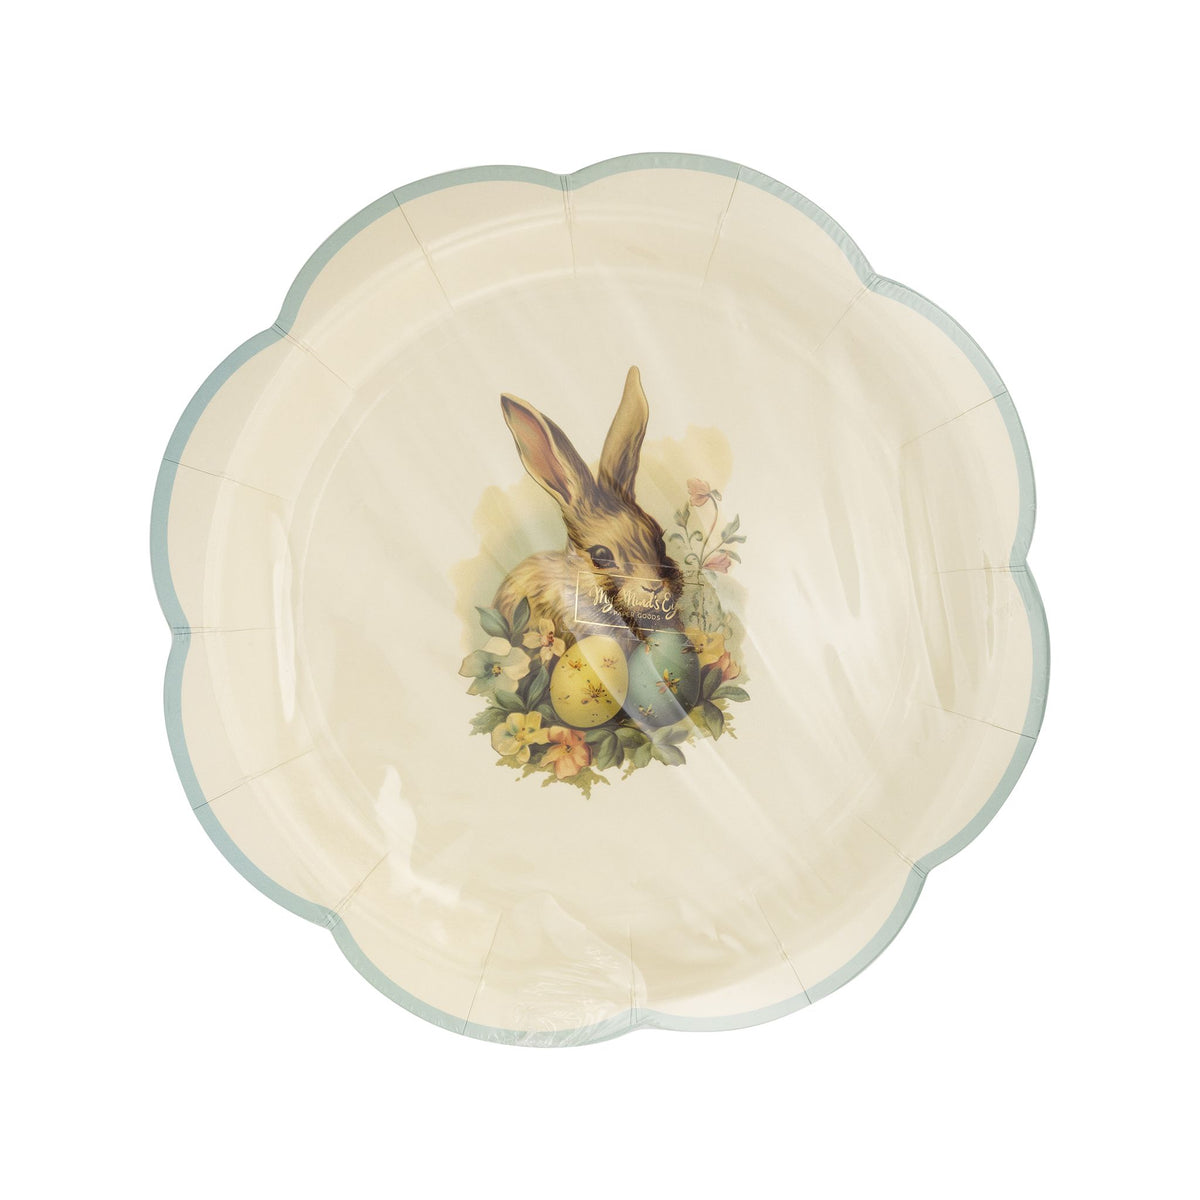 Vintage Easter Paper Plates - The Preppy Bunny